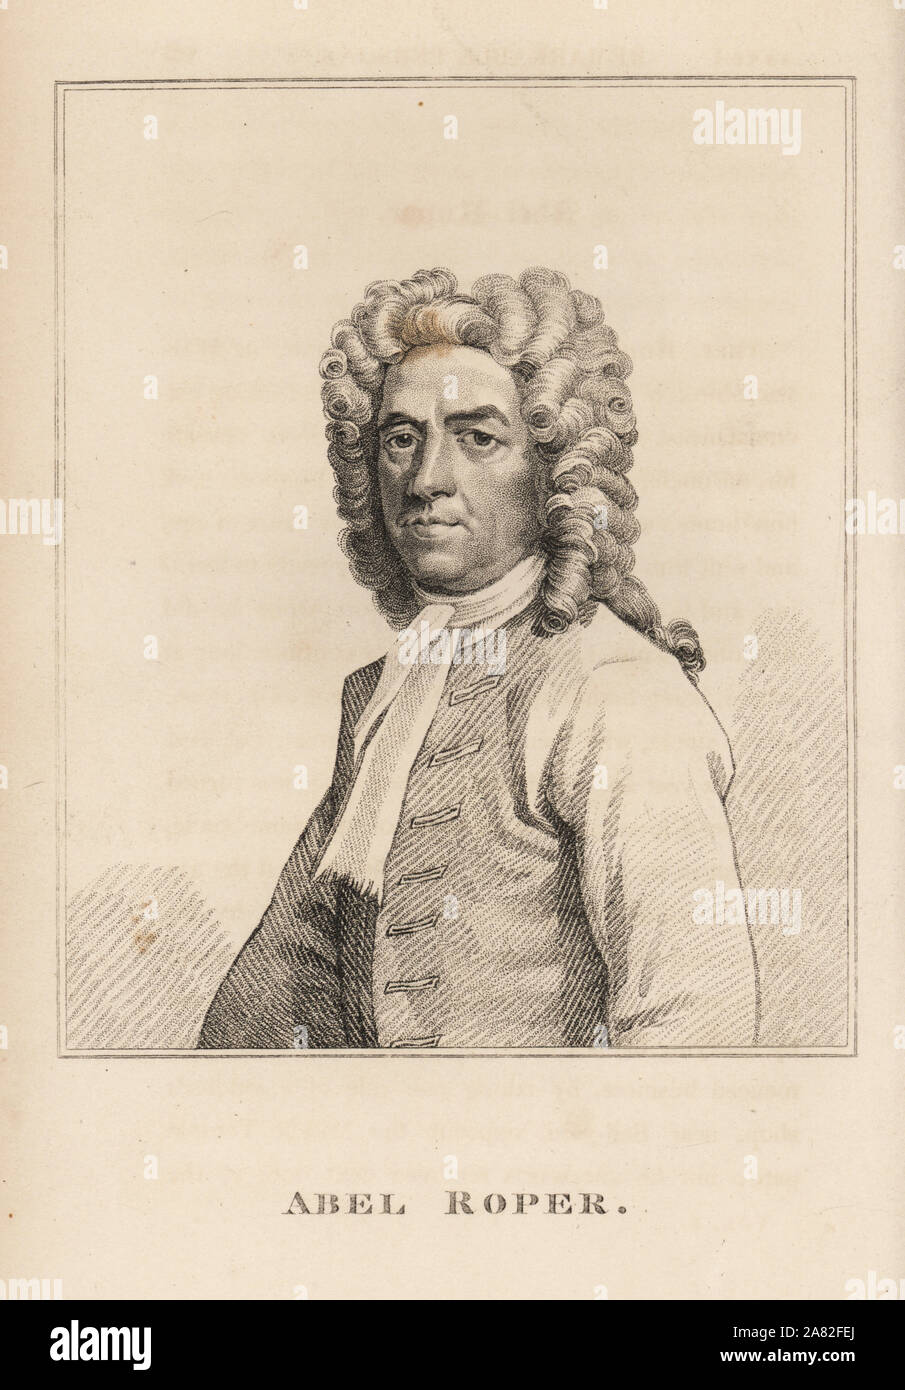 Abel Roper, London pamphlet publisher and bookseller, died in 1716. Engraving from James Caulfield's Portraits, Memoirs and Characters of Remarkable Persons, London, 1819. Stock Photo